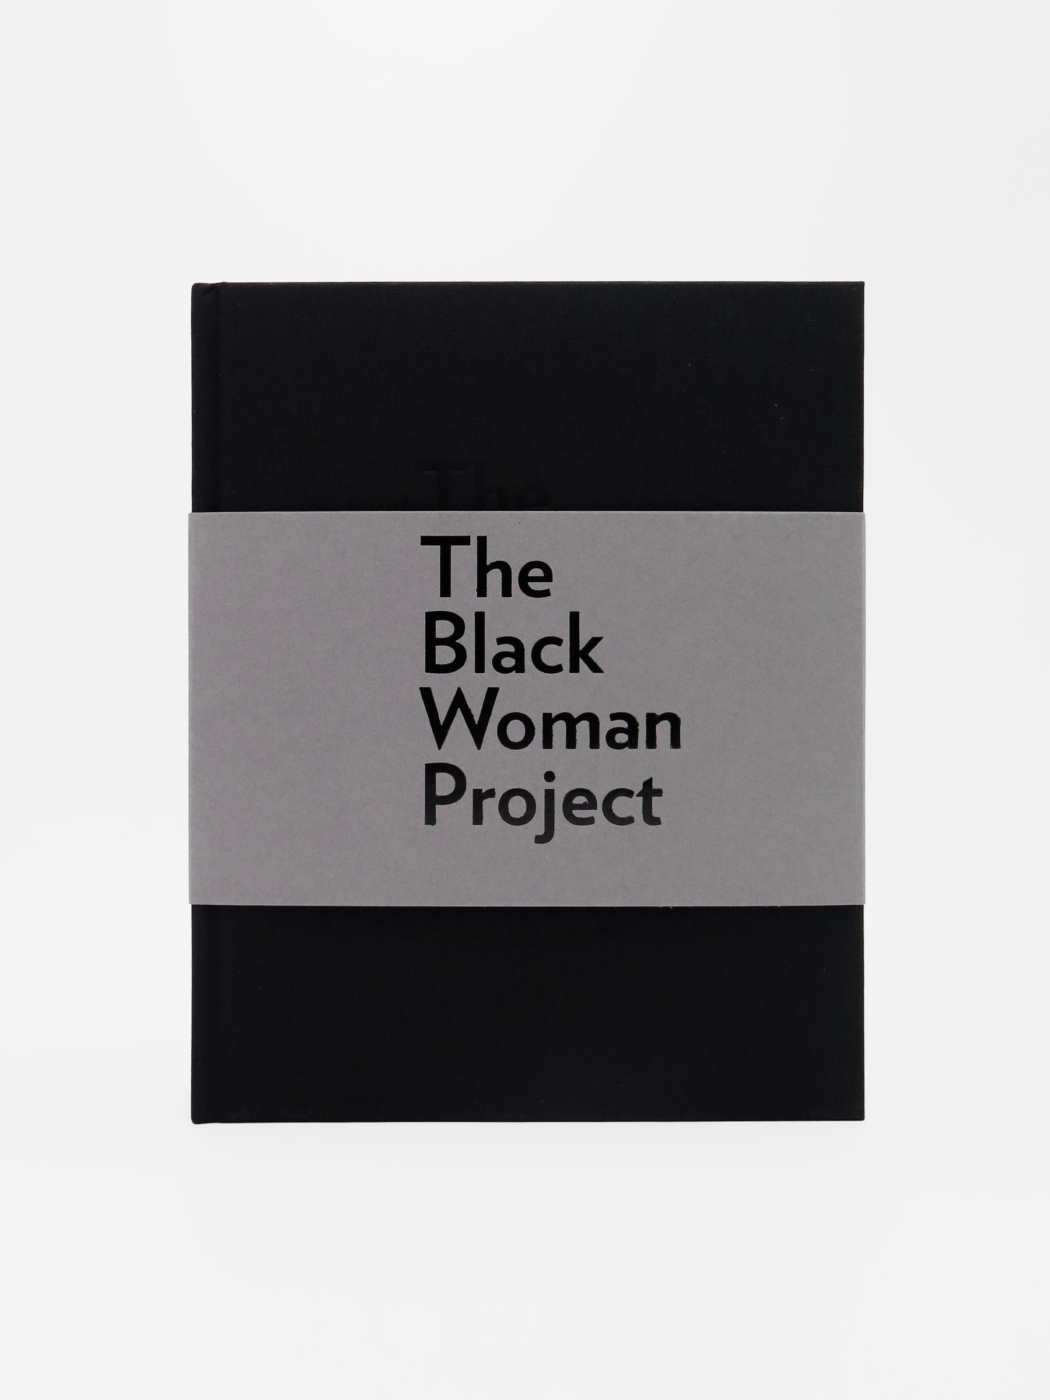 Gwen Smith, The Black Woman Project